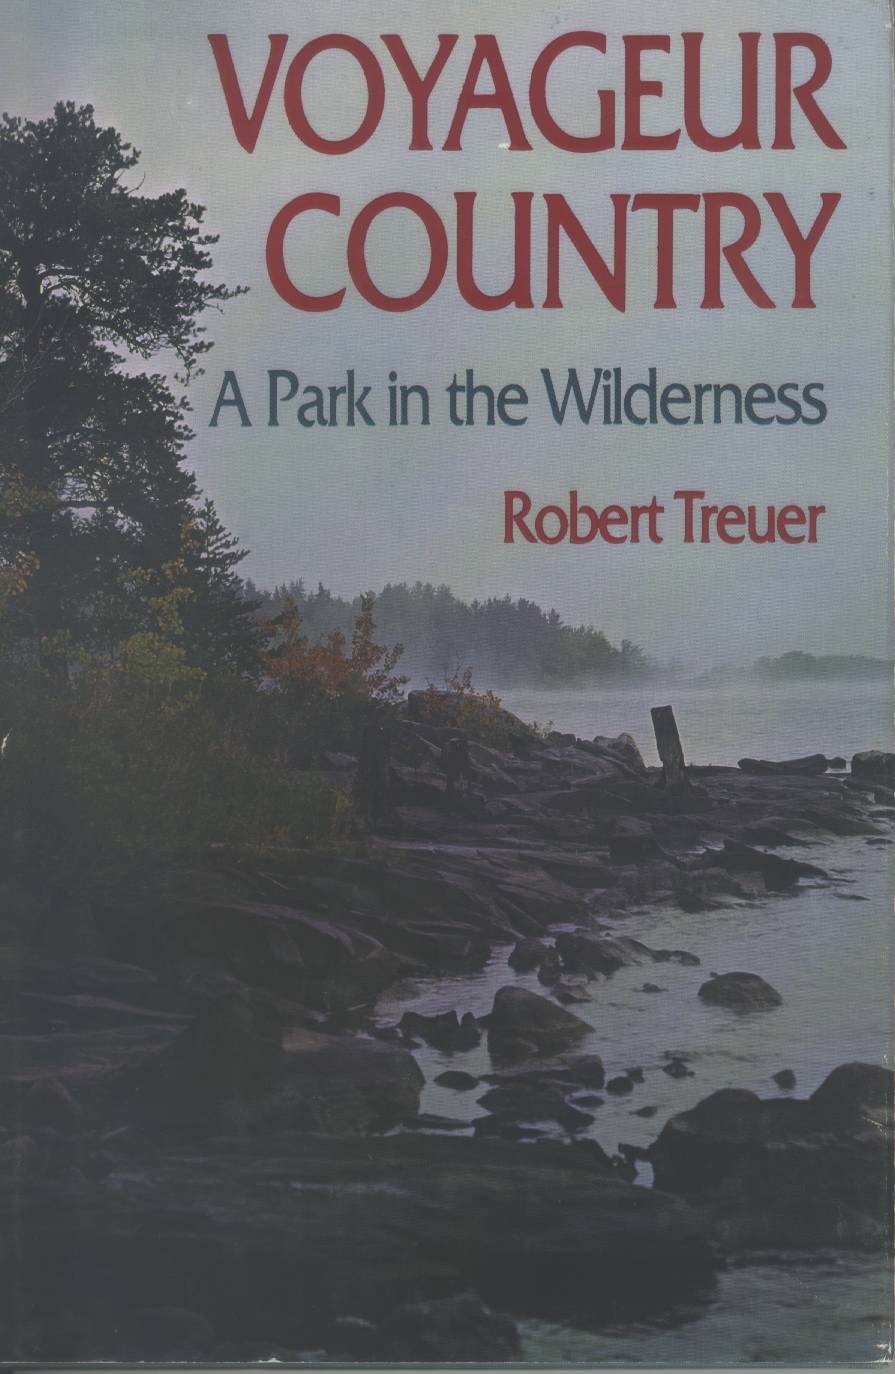 VOYAGEUR COUNTRY: a park in the wilderness.